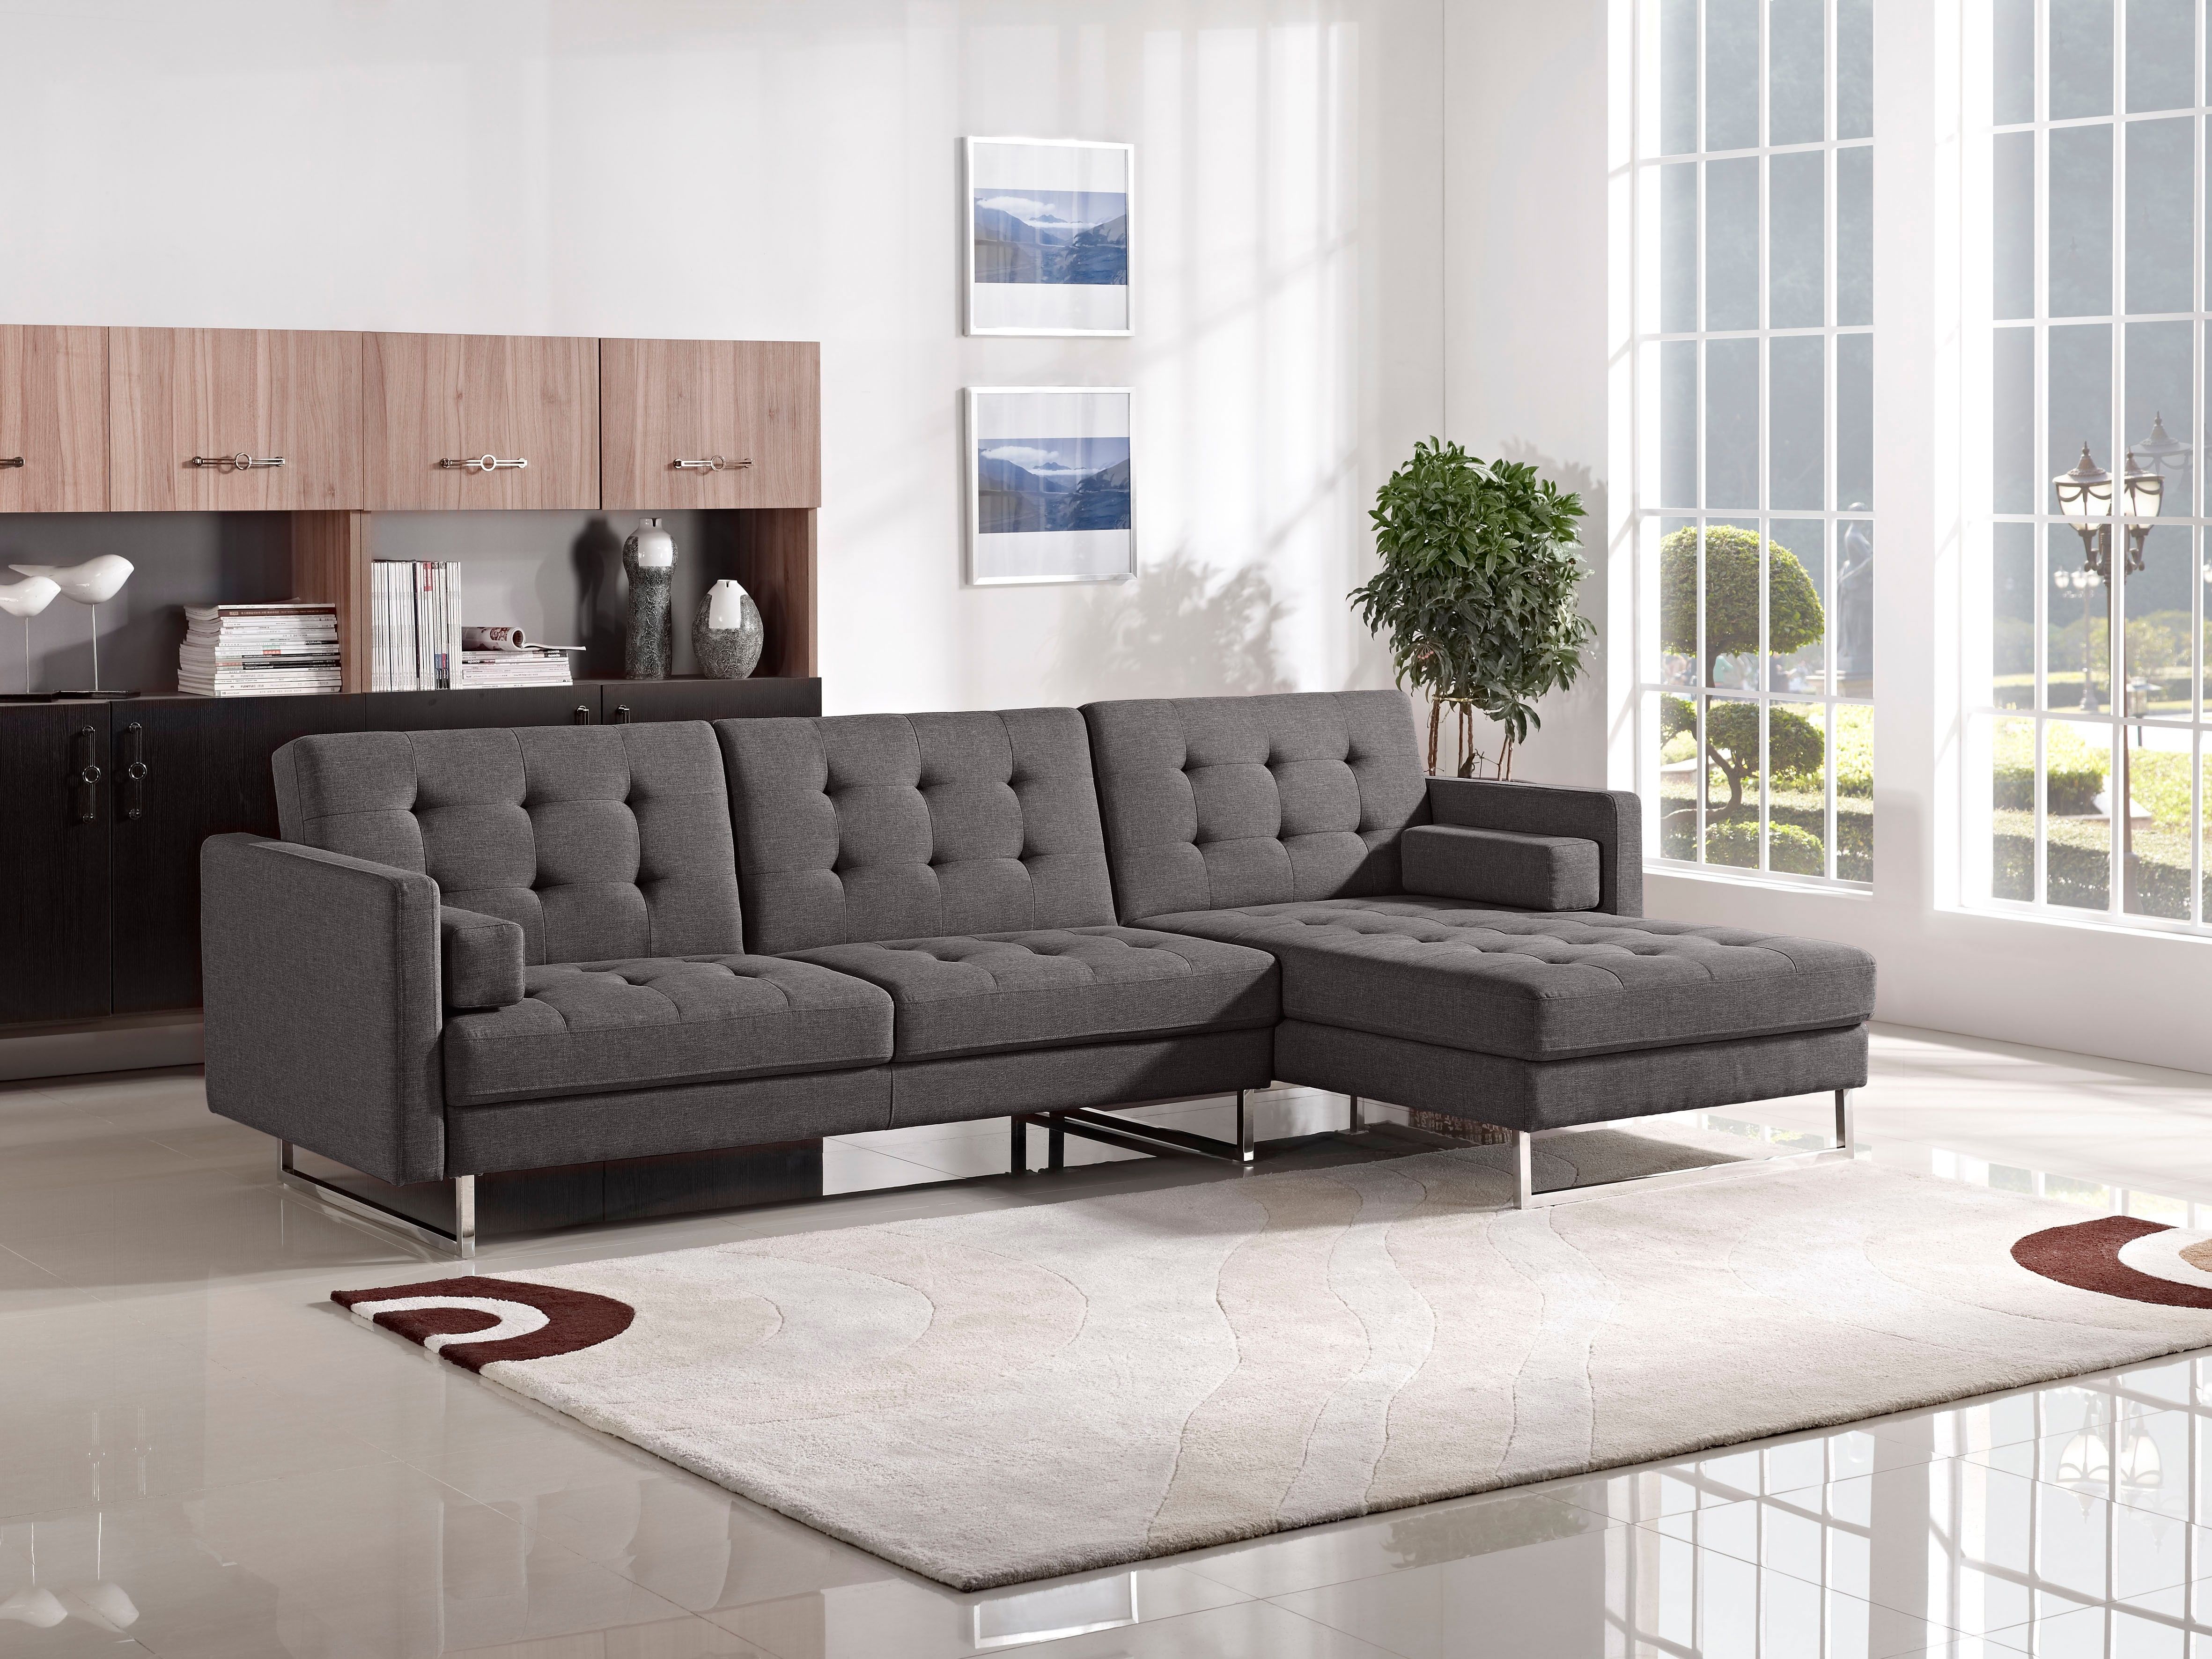 Tufted Sectional Sofa With Chaise Cleanupflorida Pertaining To Affordable Tufted Sofa (View 8 of 12)